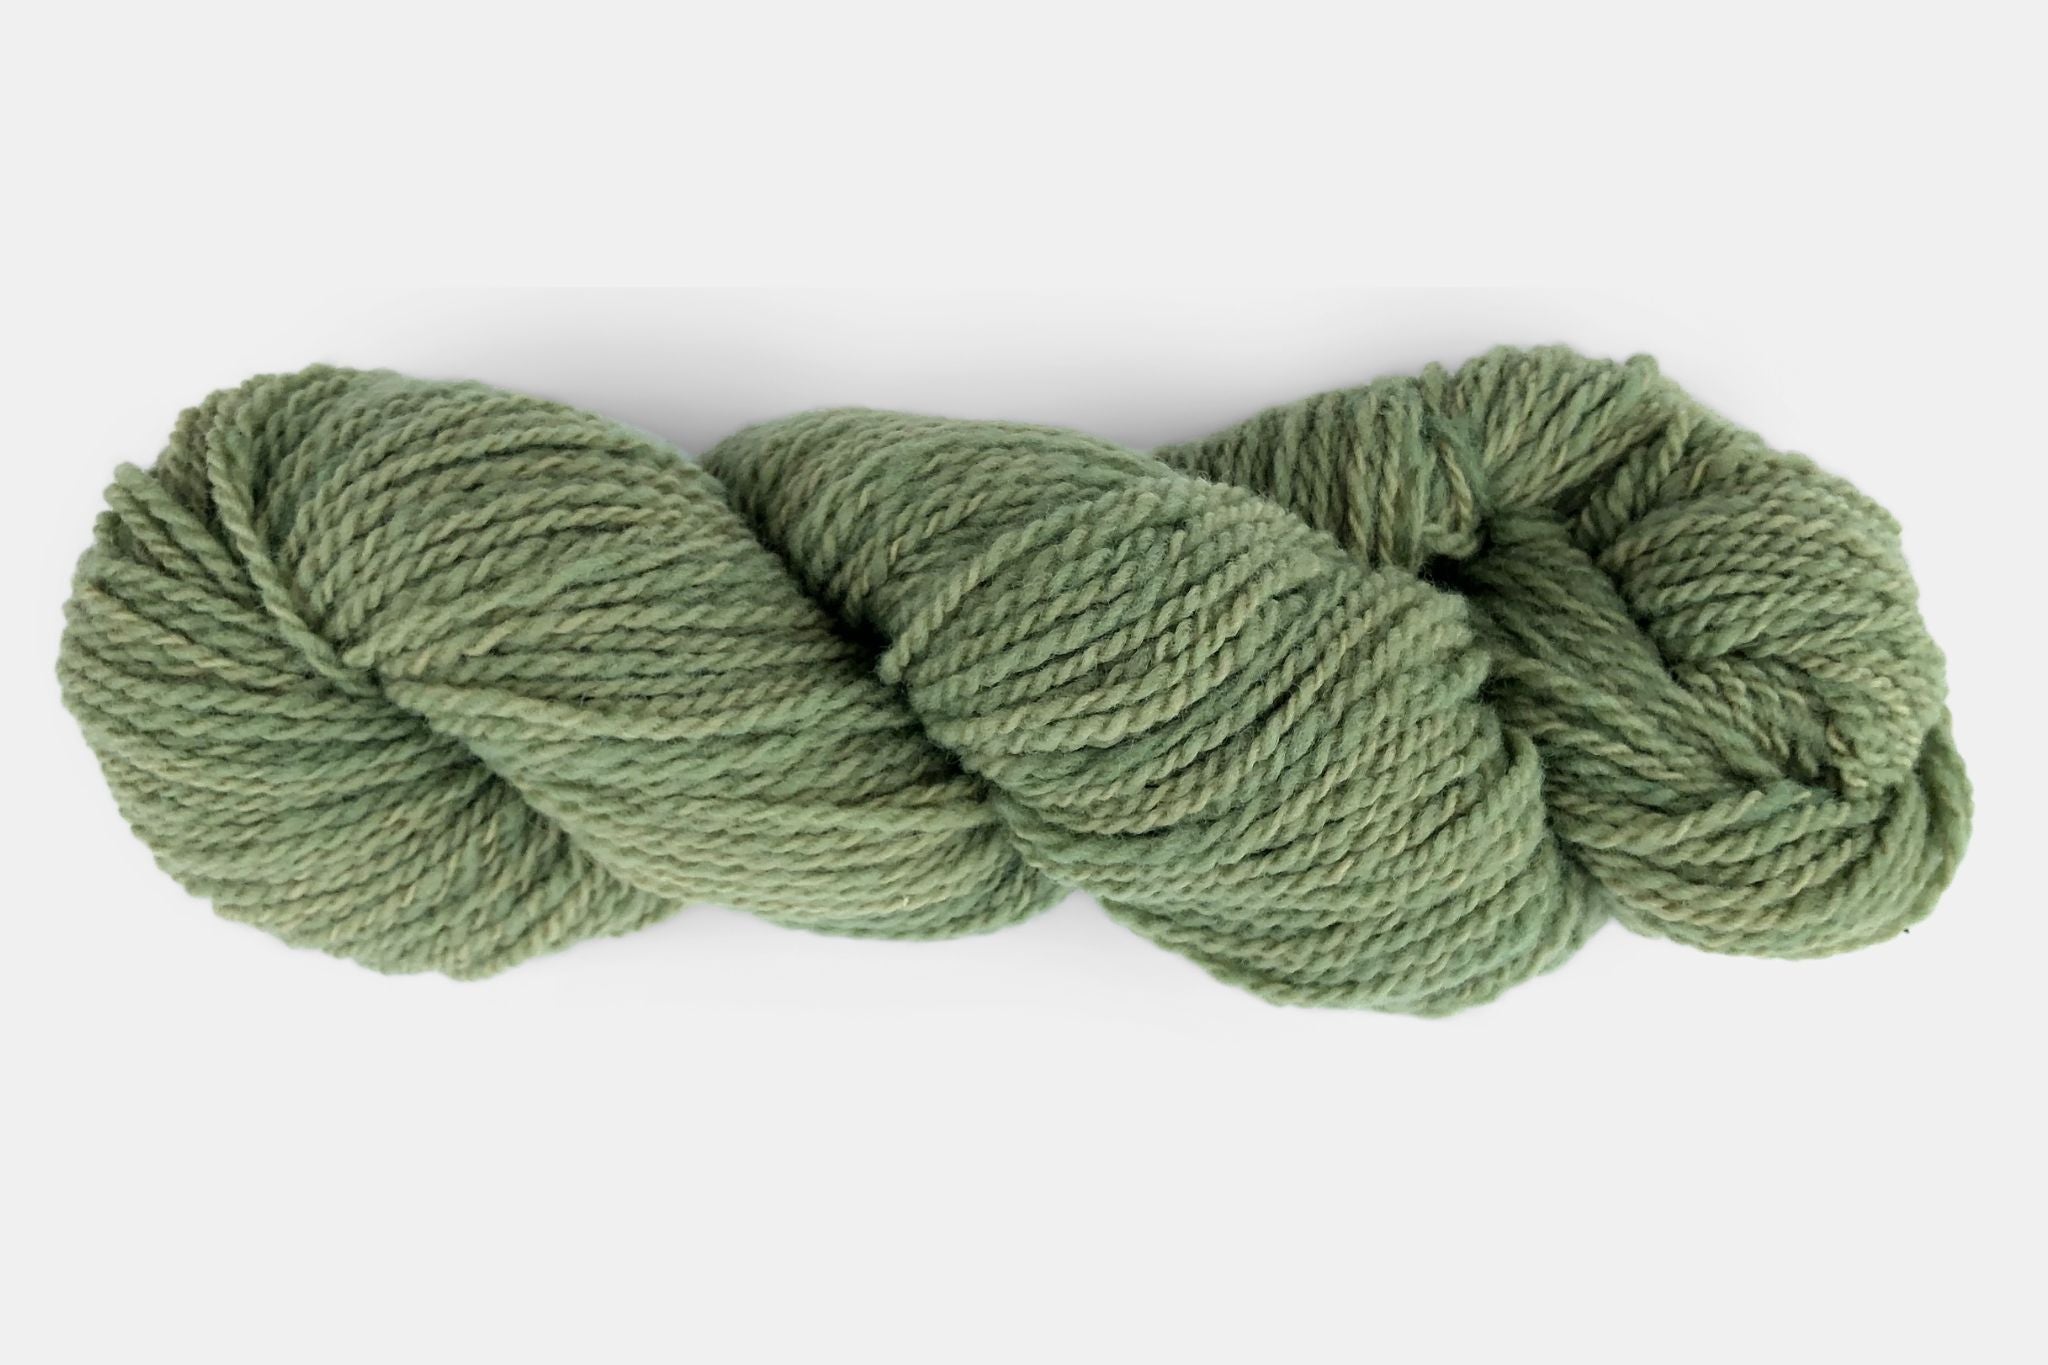 Fleece and Harmony Selkirk Worsted in Clover